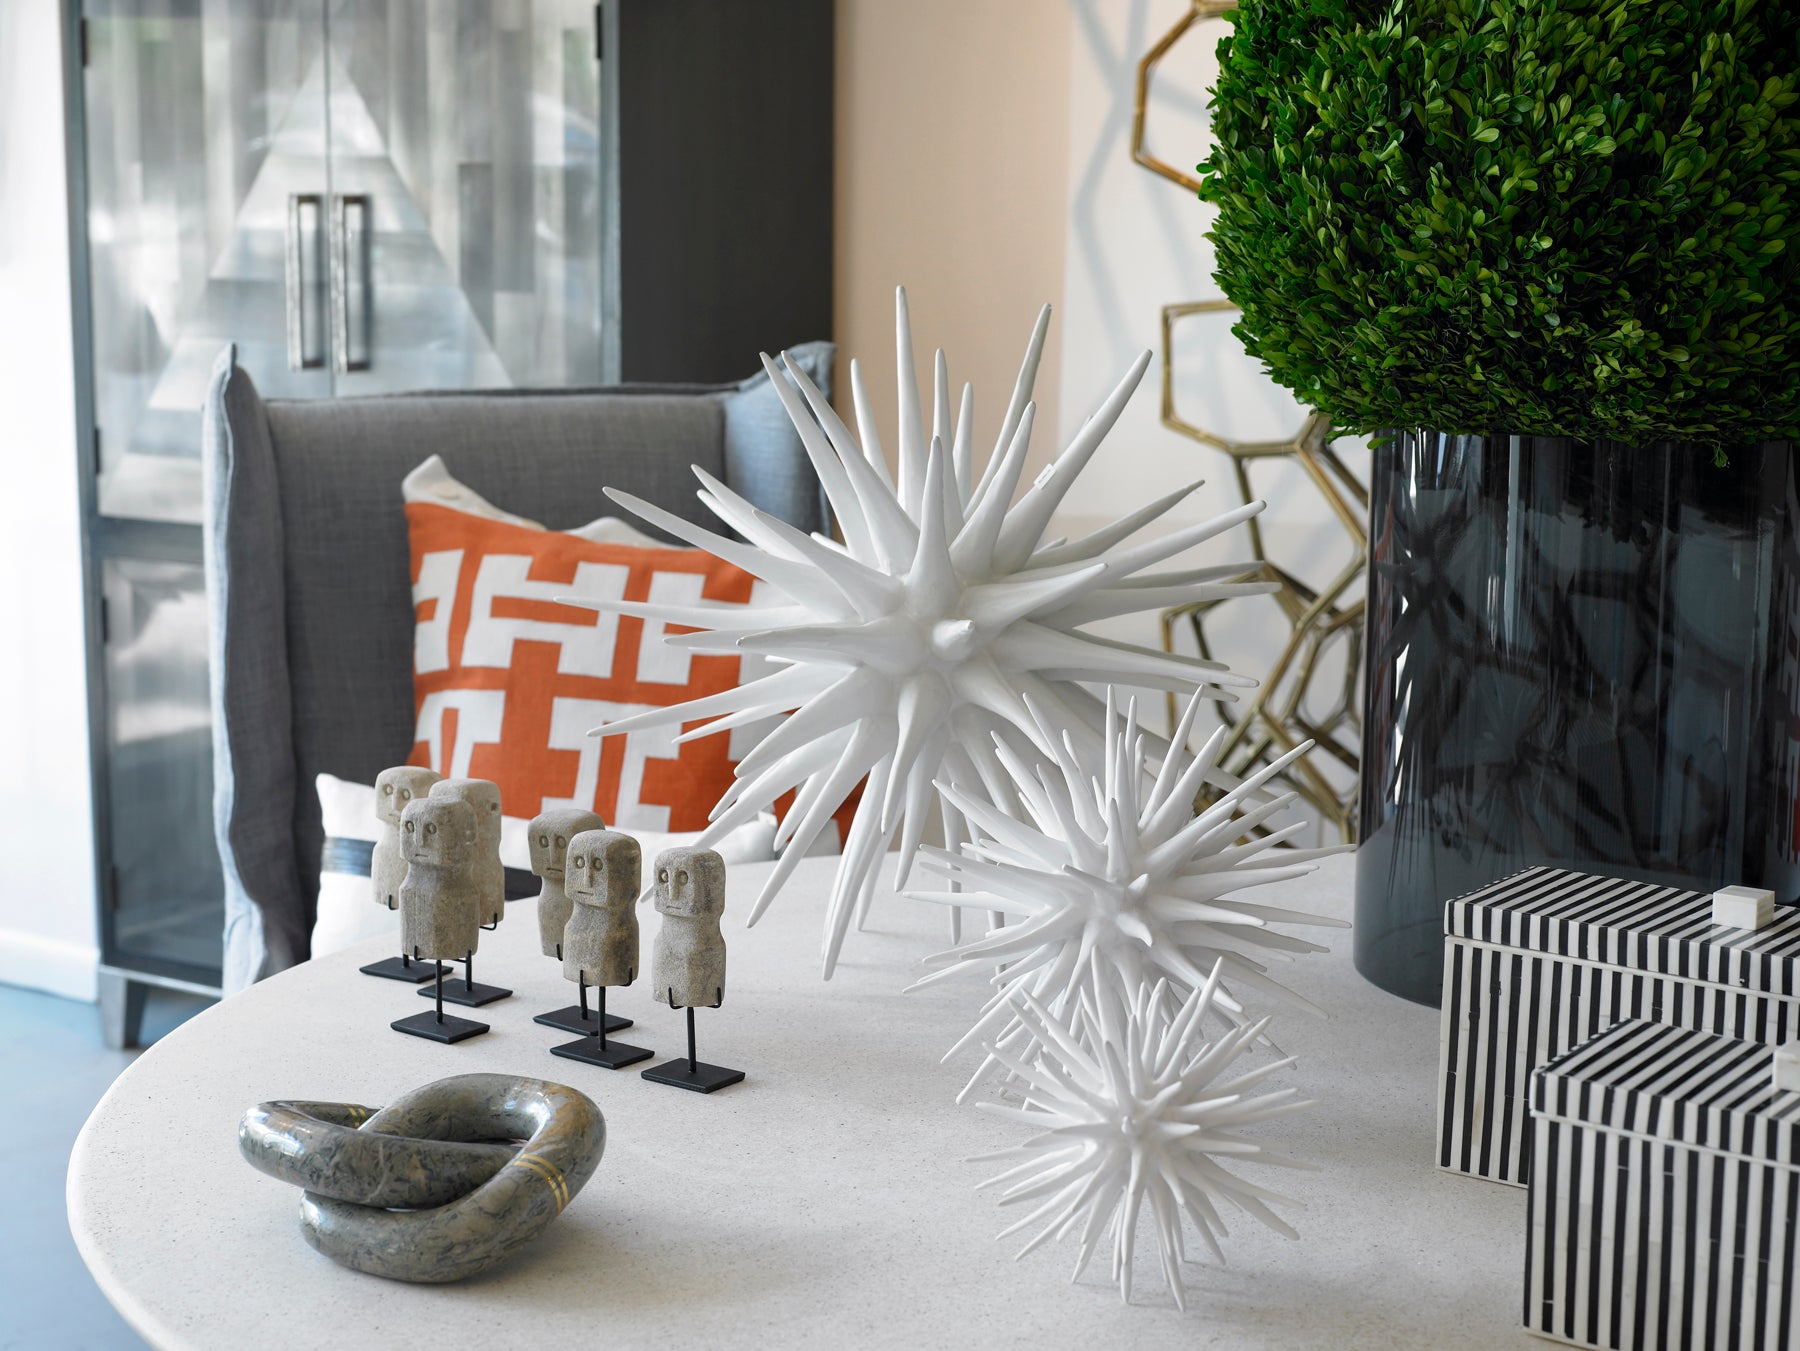 all three sizes of the sea urchin sculpture together on a coffee table